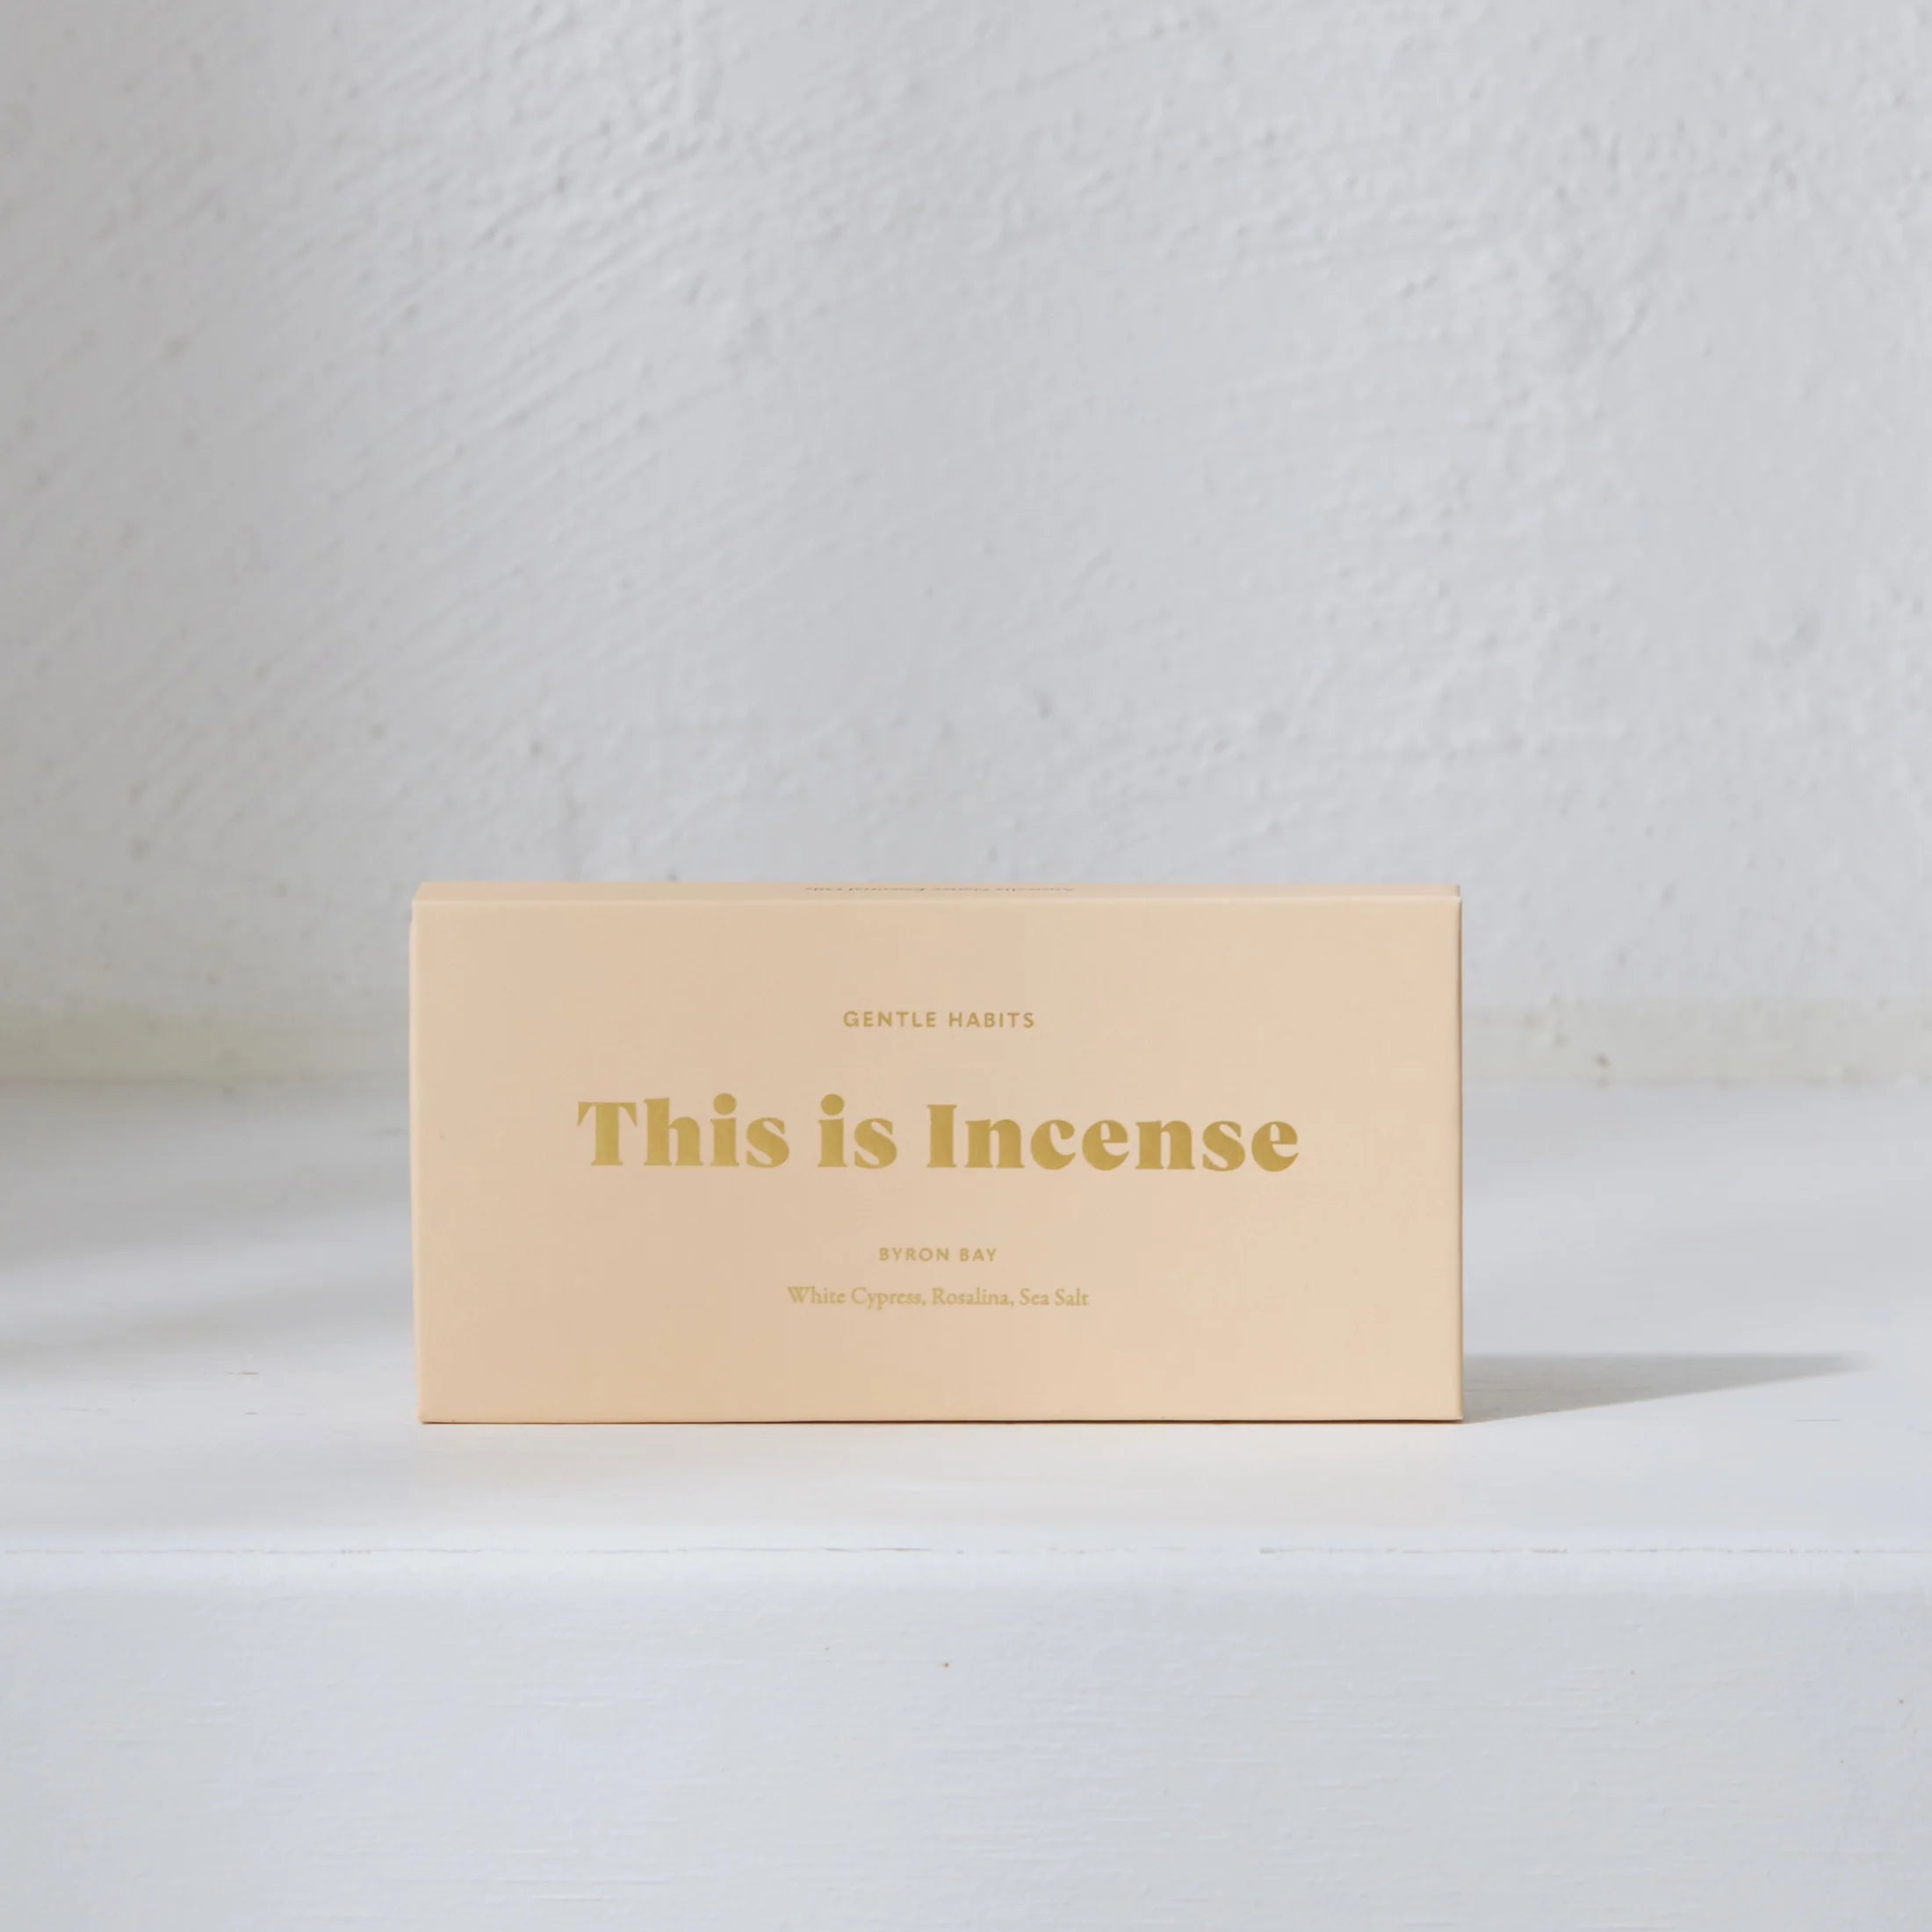 This is Incense by Gentle Habits - Byron Bay Incense